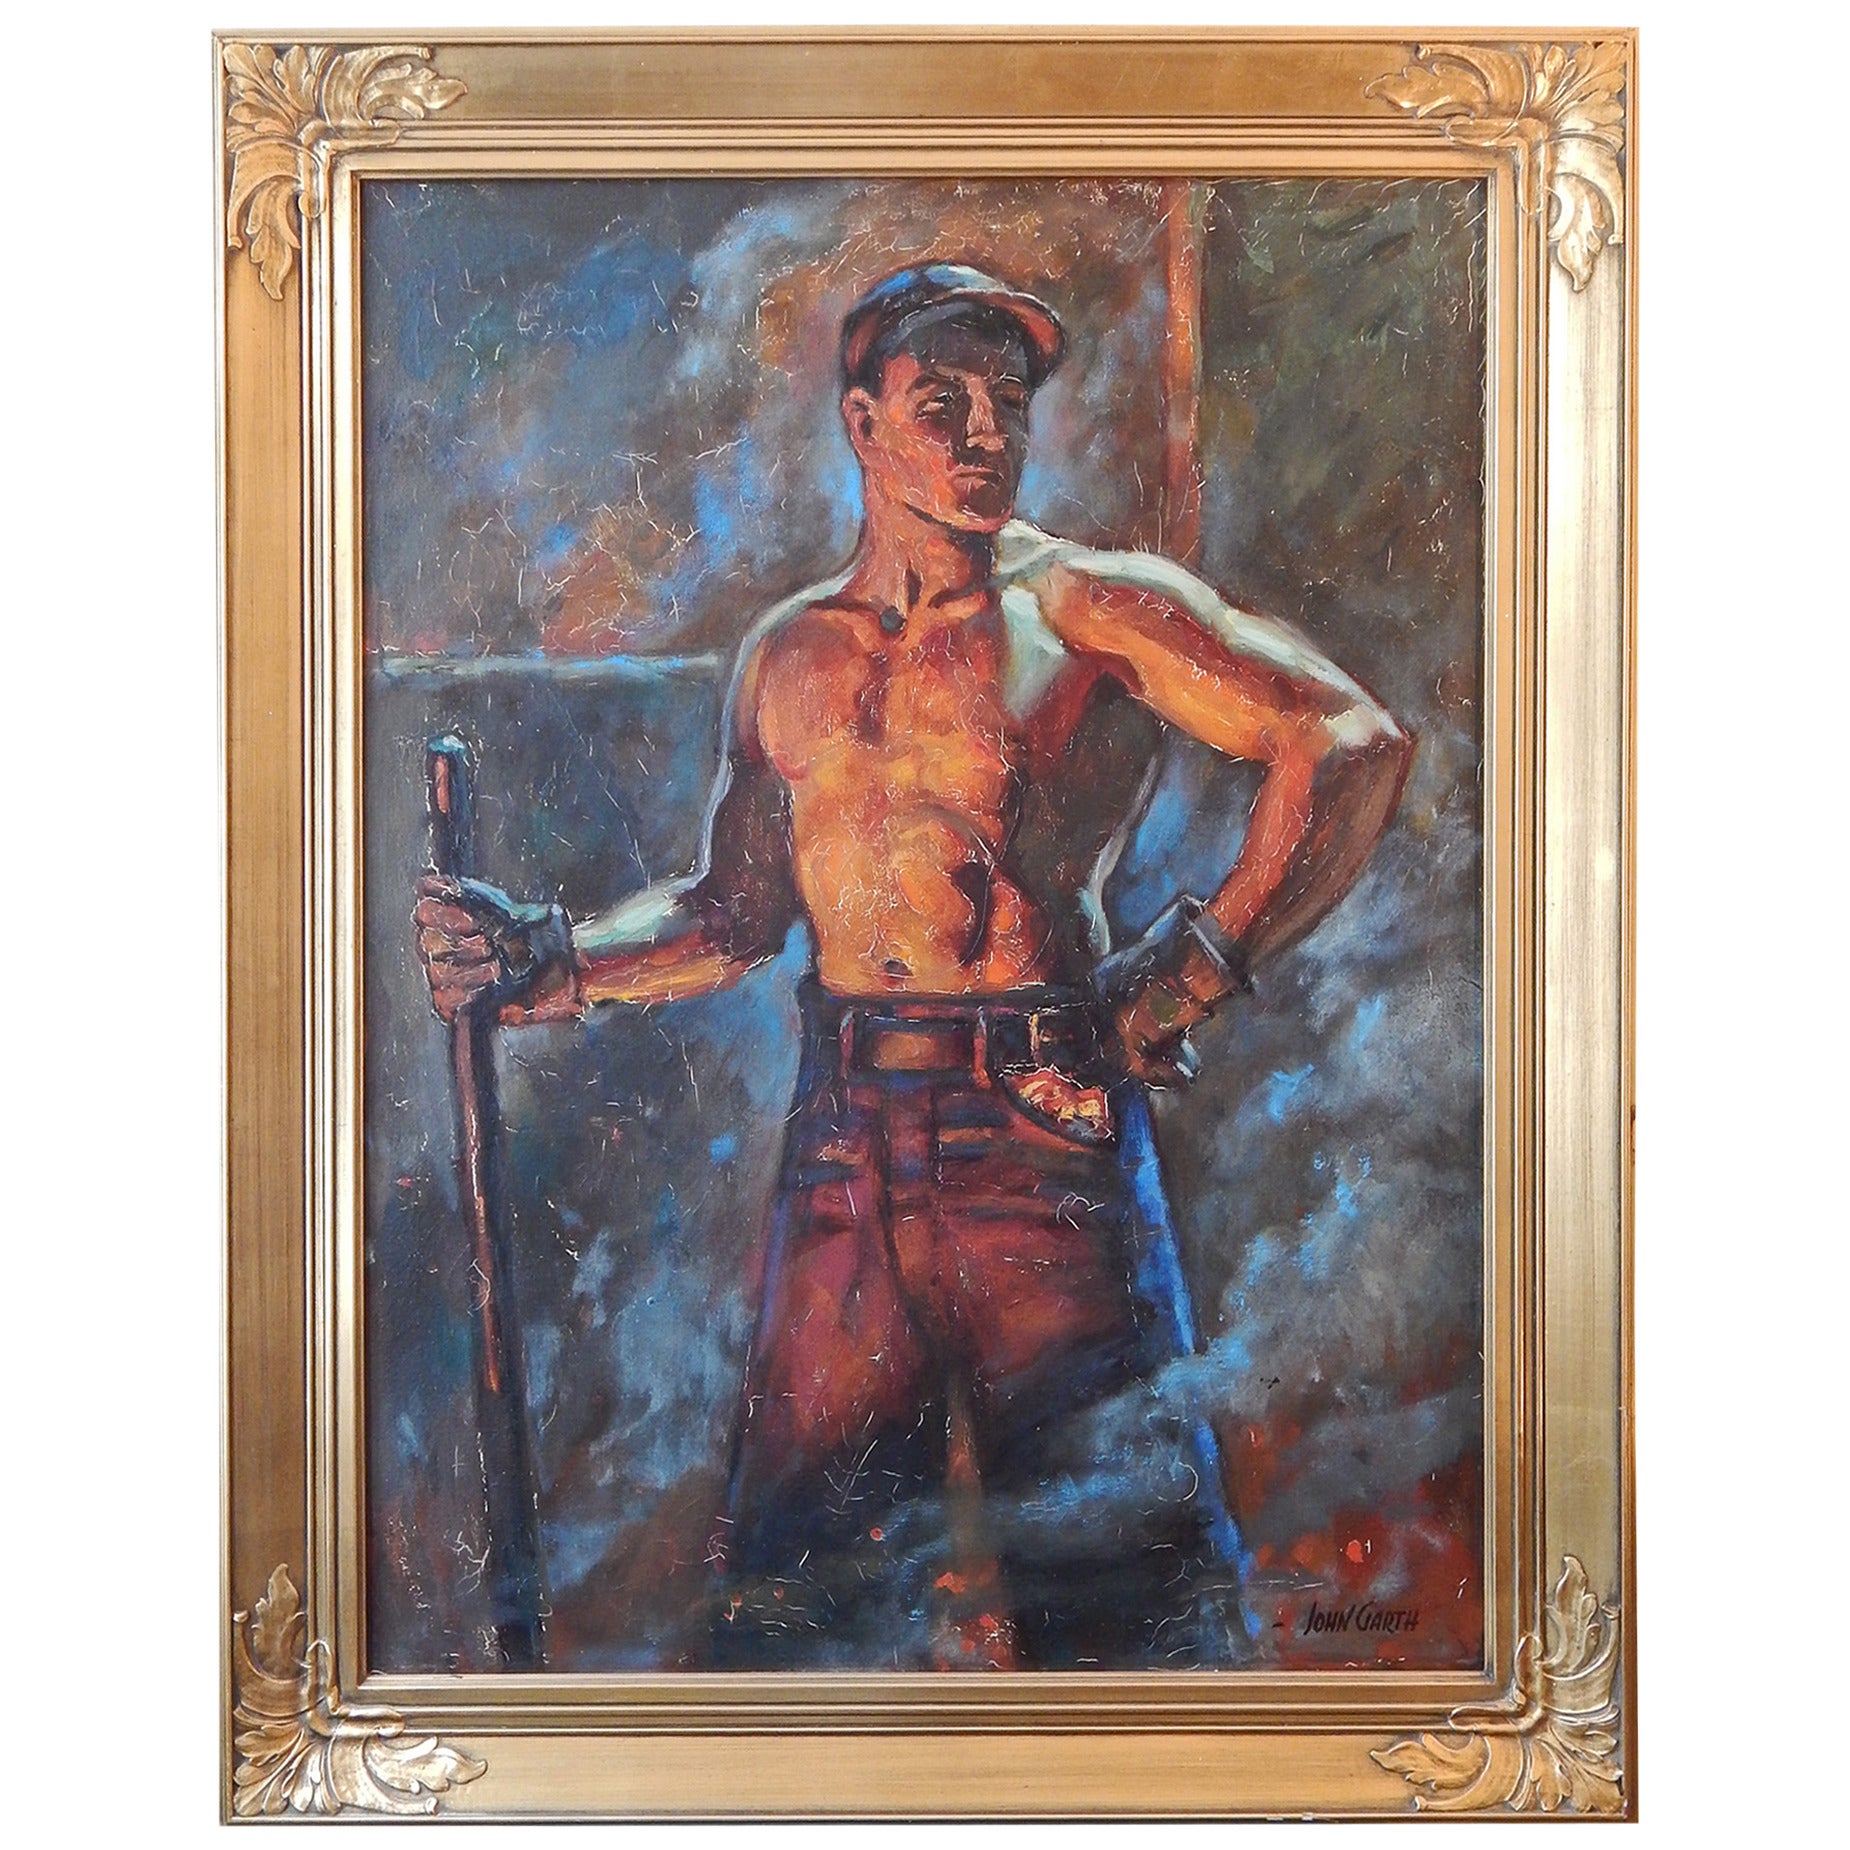 "The Ironworker" Paean to the American Industrial Worker, 1930s